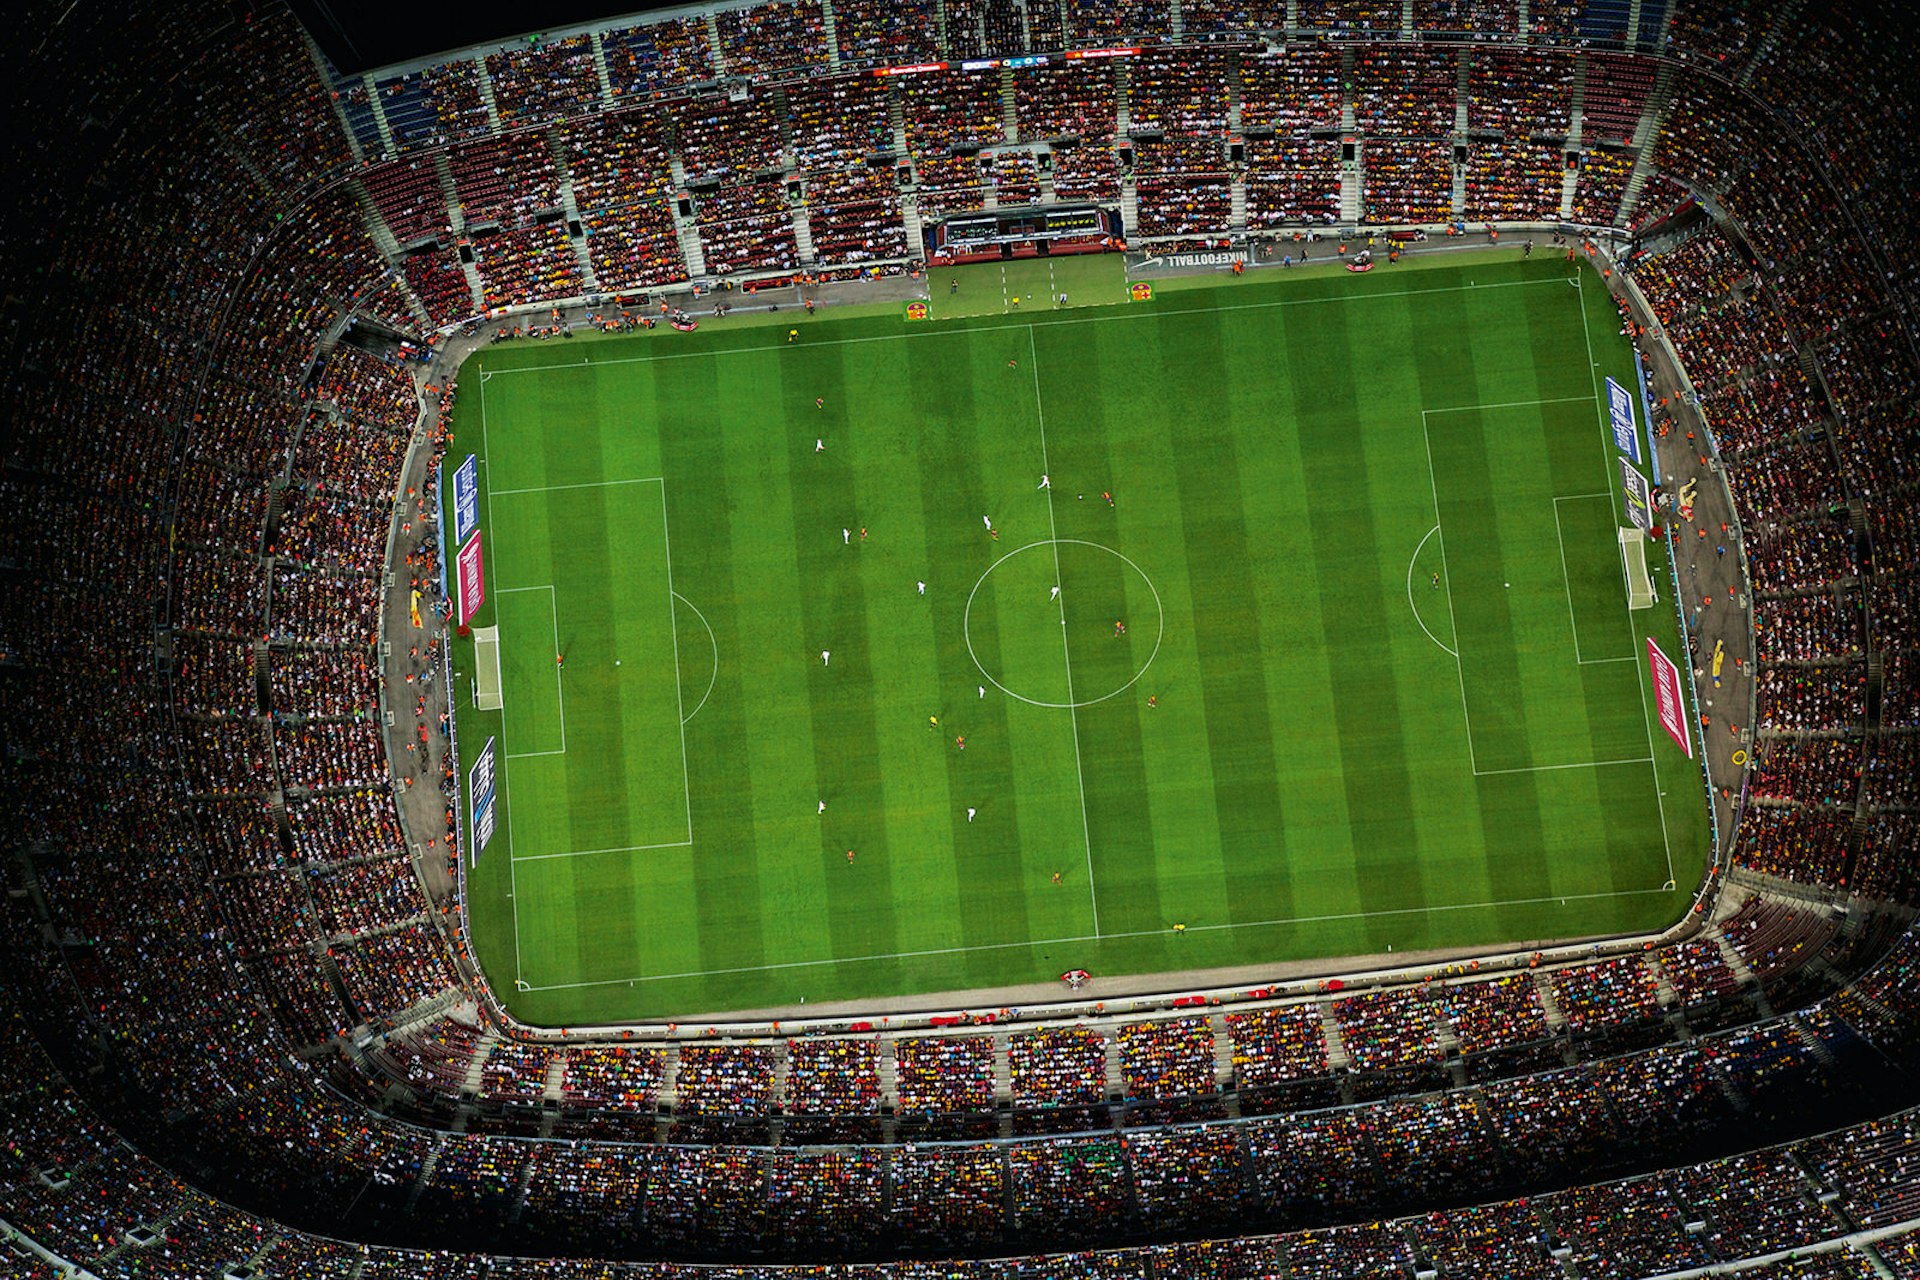 Camp Nou stadium as shown from above with the pitch encircled by a sell-out crowd. Rivalries in sport